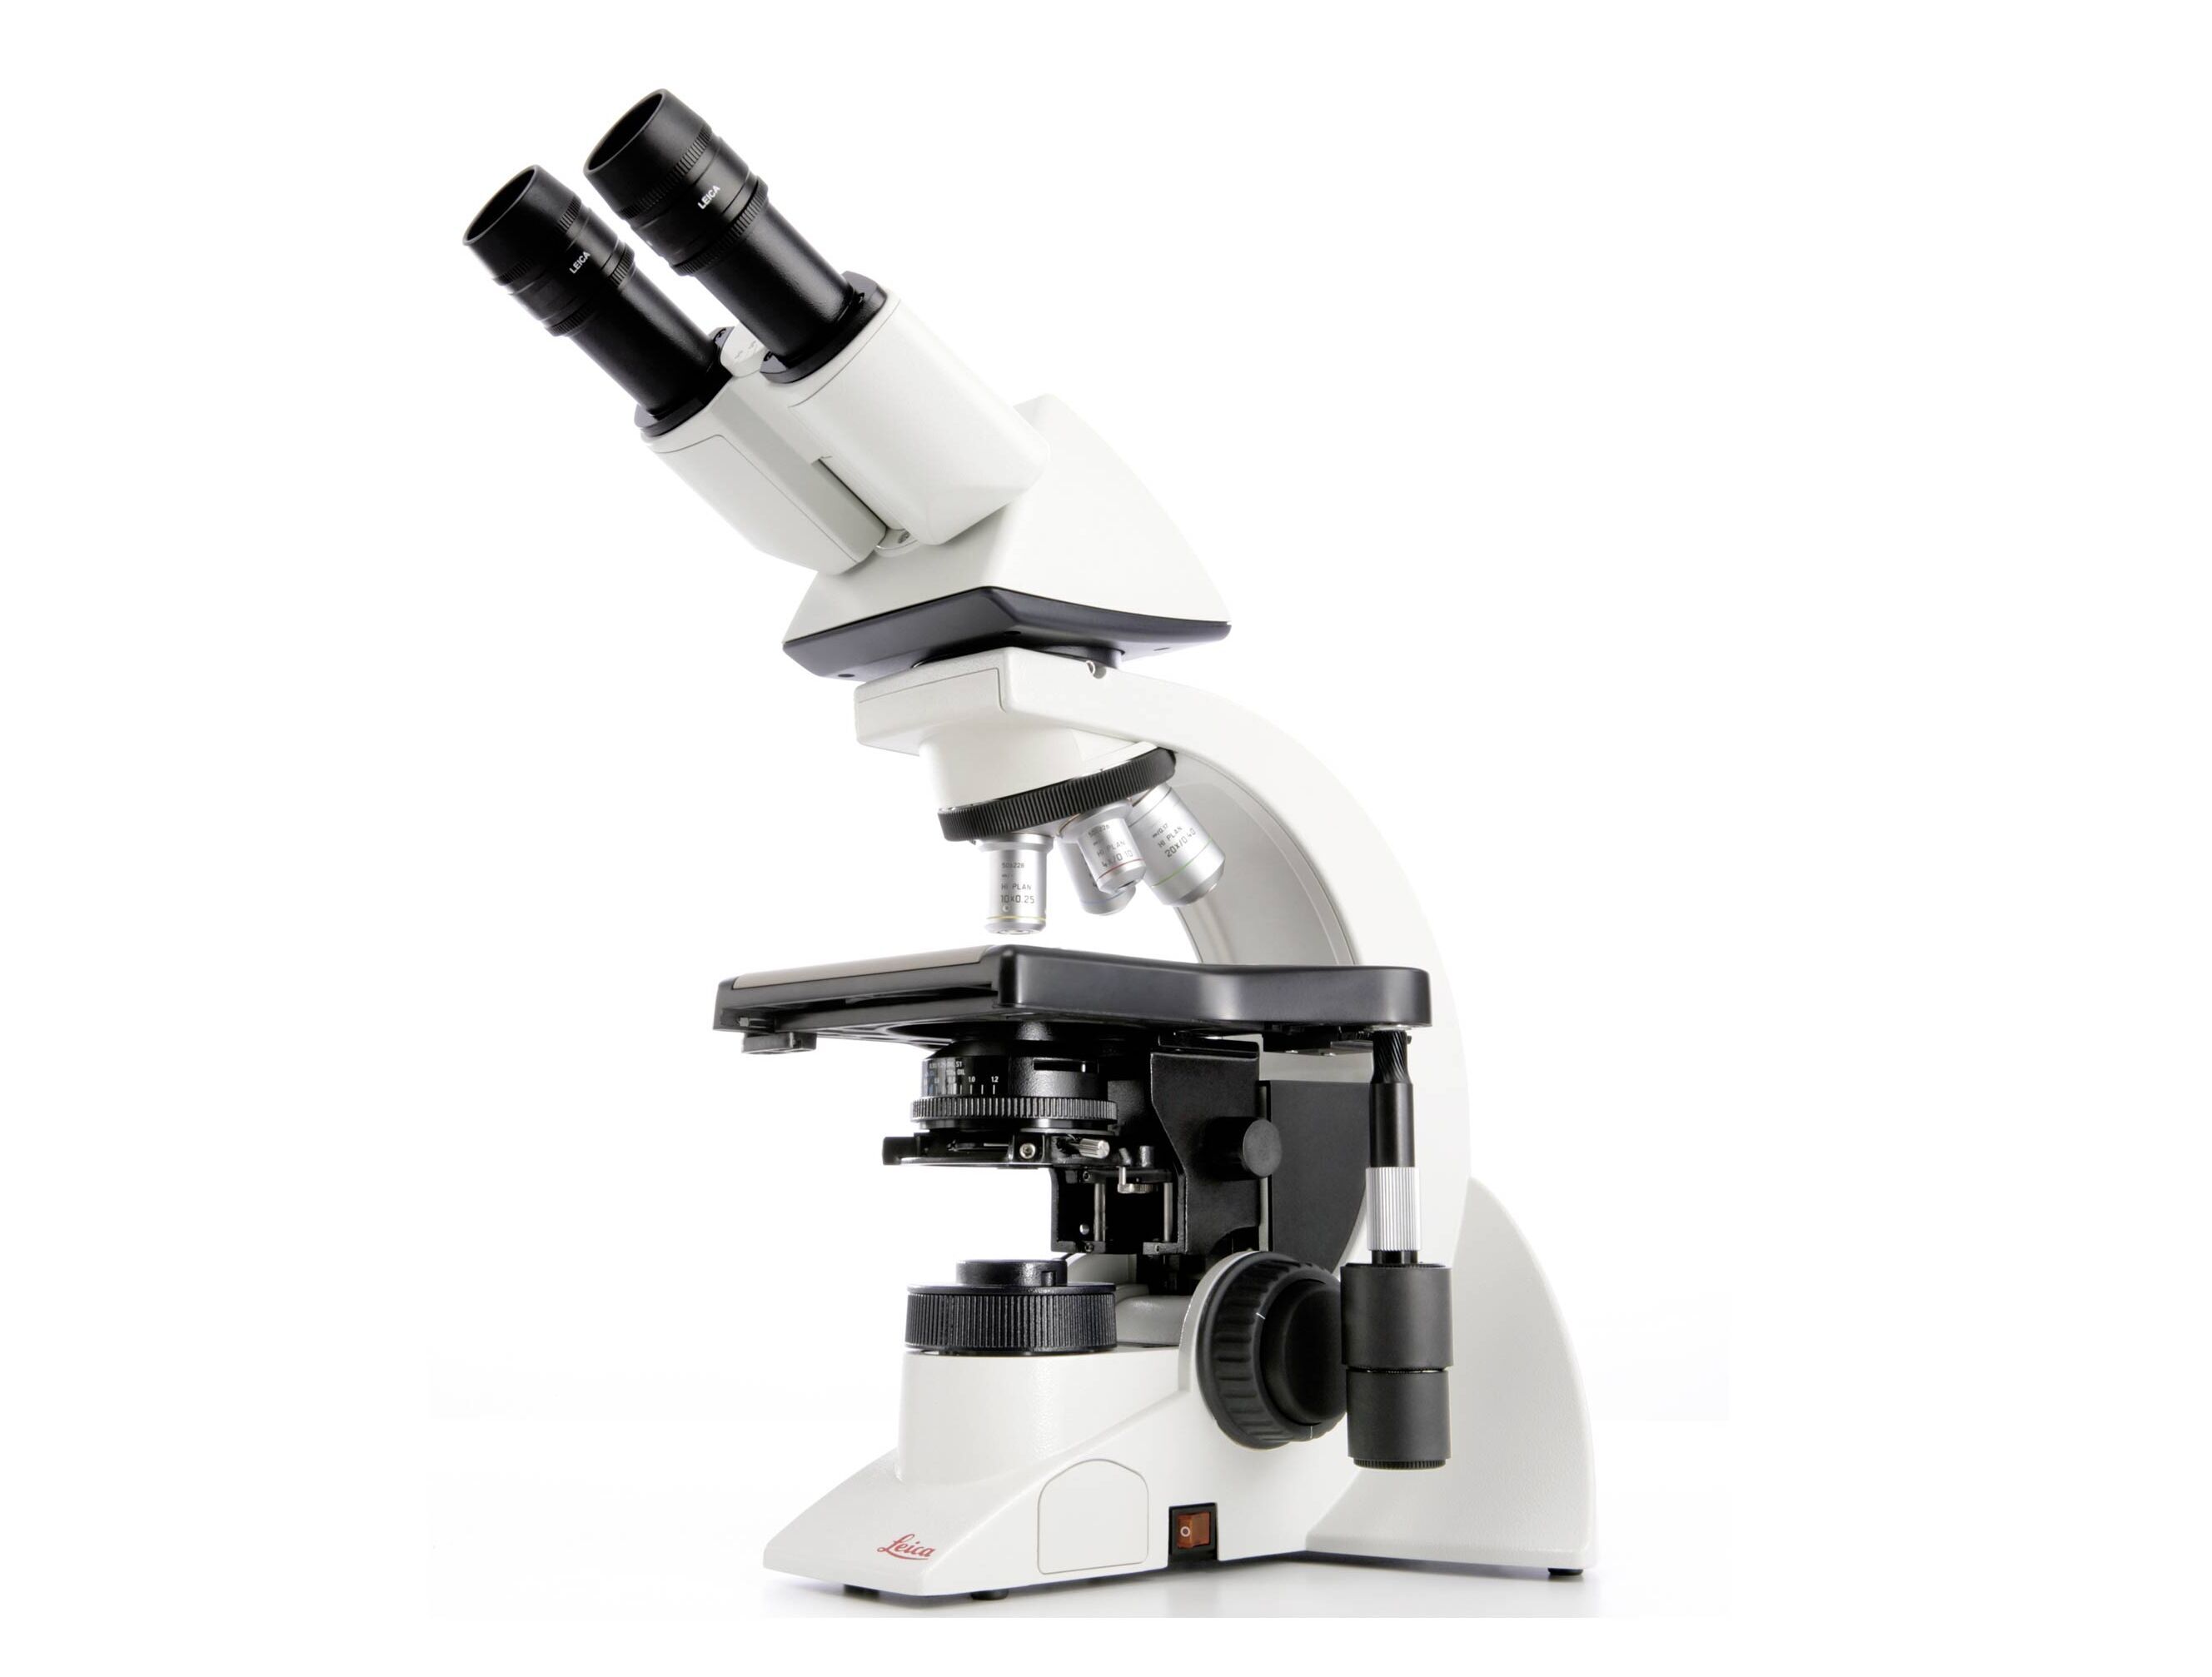 The Leica DM1000 LED combines the advantages of a fully ergonomic system microscope with innovative LED illumination, and unlimited possibilities in mobile use.